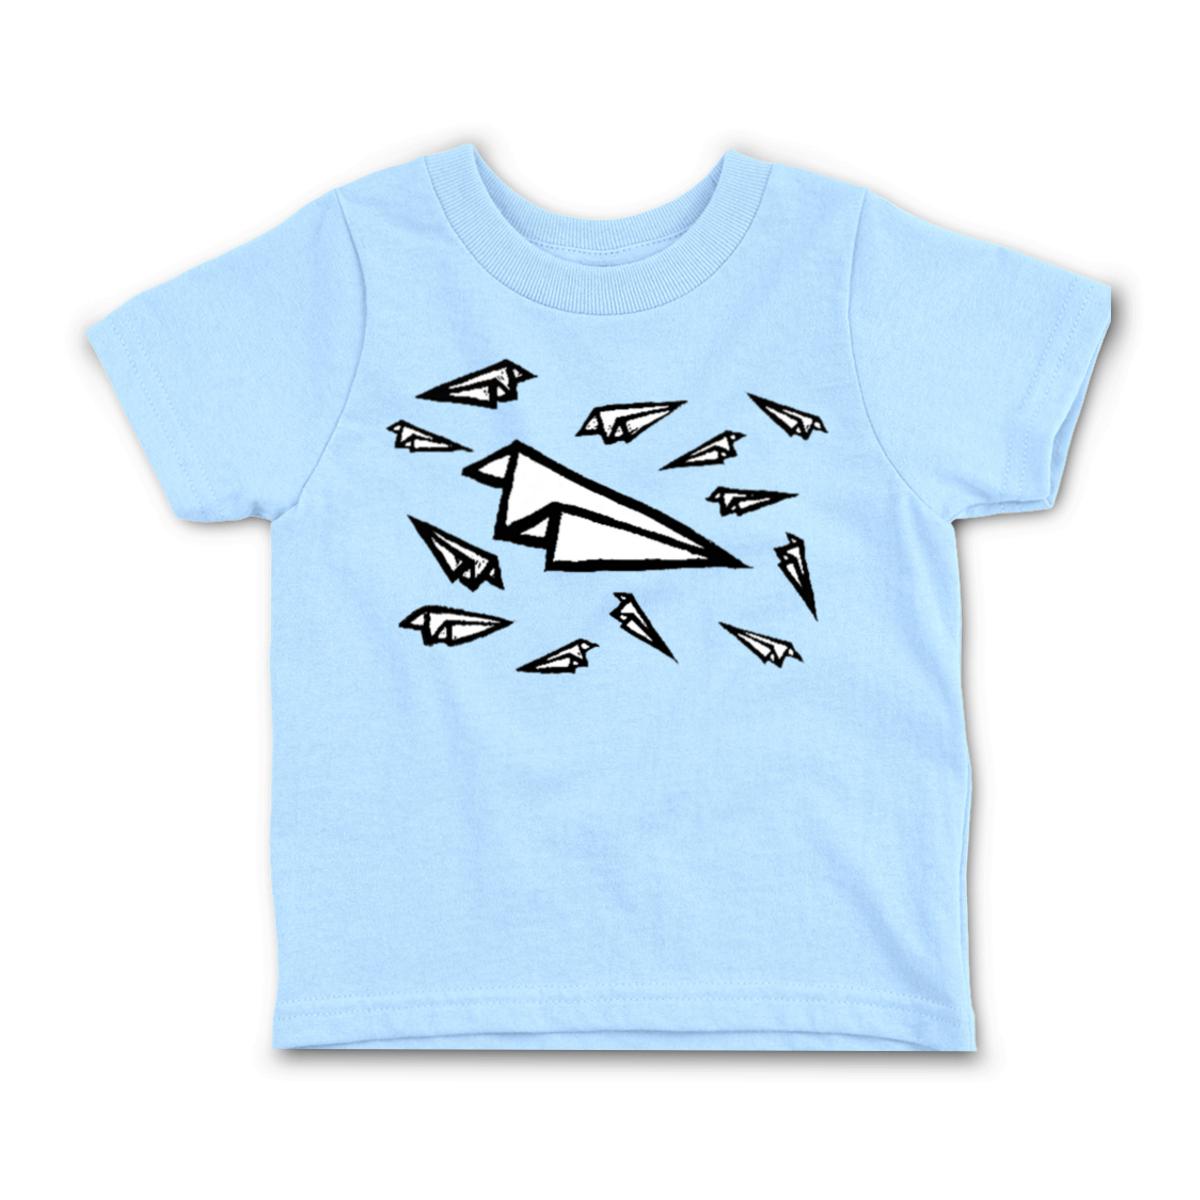 Airplane Frenzy Toddler Tee 2T light-blue